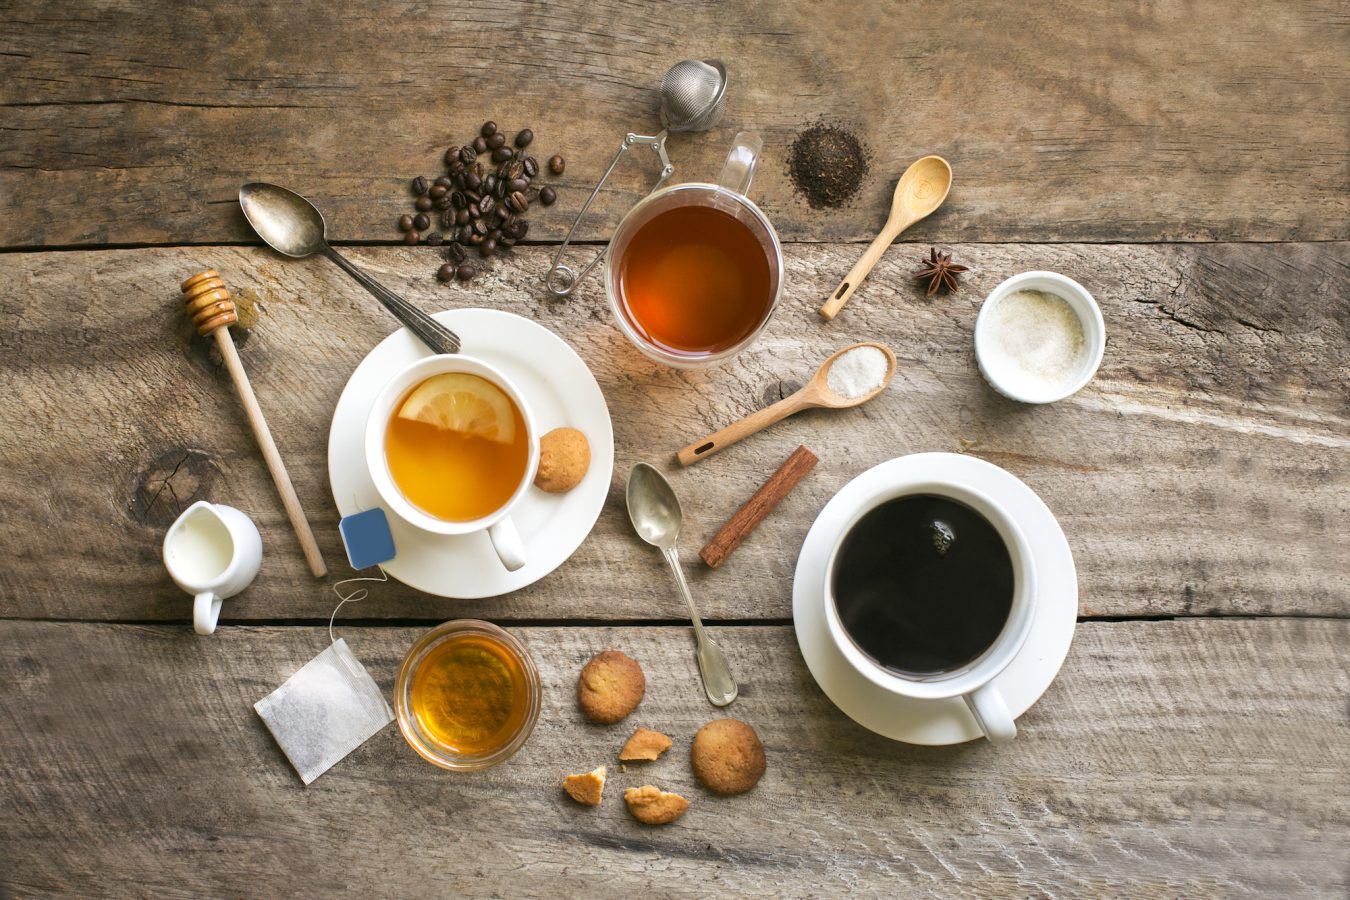 Is tea better for you than coffee? We settle the age-old debate once and for all